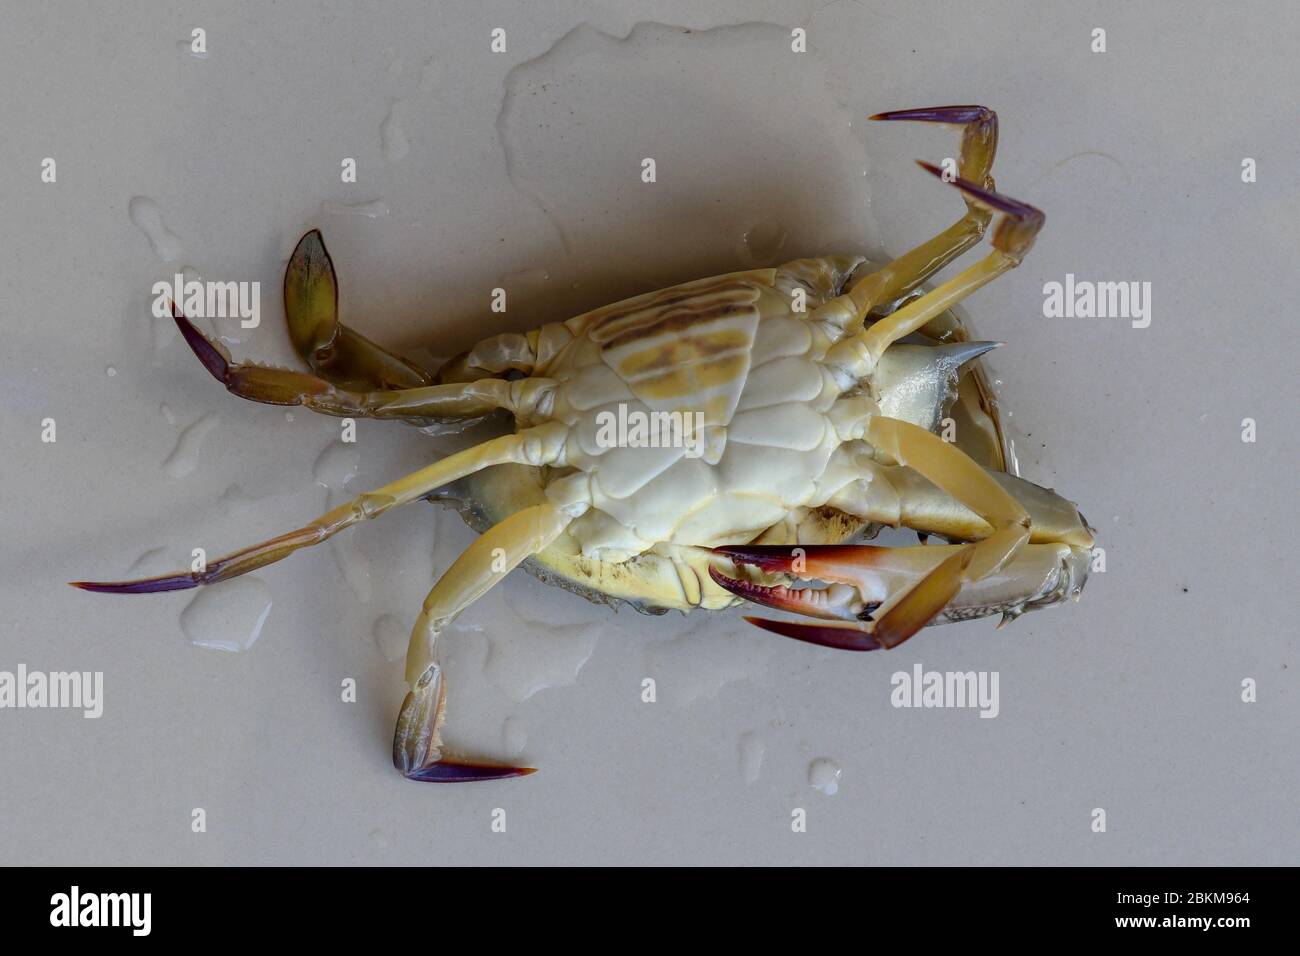 Ventral view of Blue manna crab, Sand crab. Flower crab. Portunus pelagicus isolated on a white background. Close-up photo of fresh raw Blue swimming Stock Photo